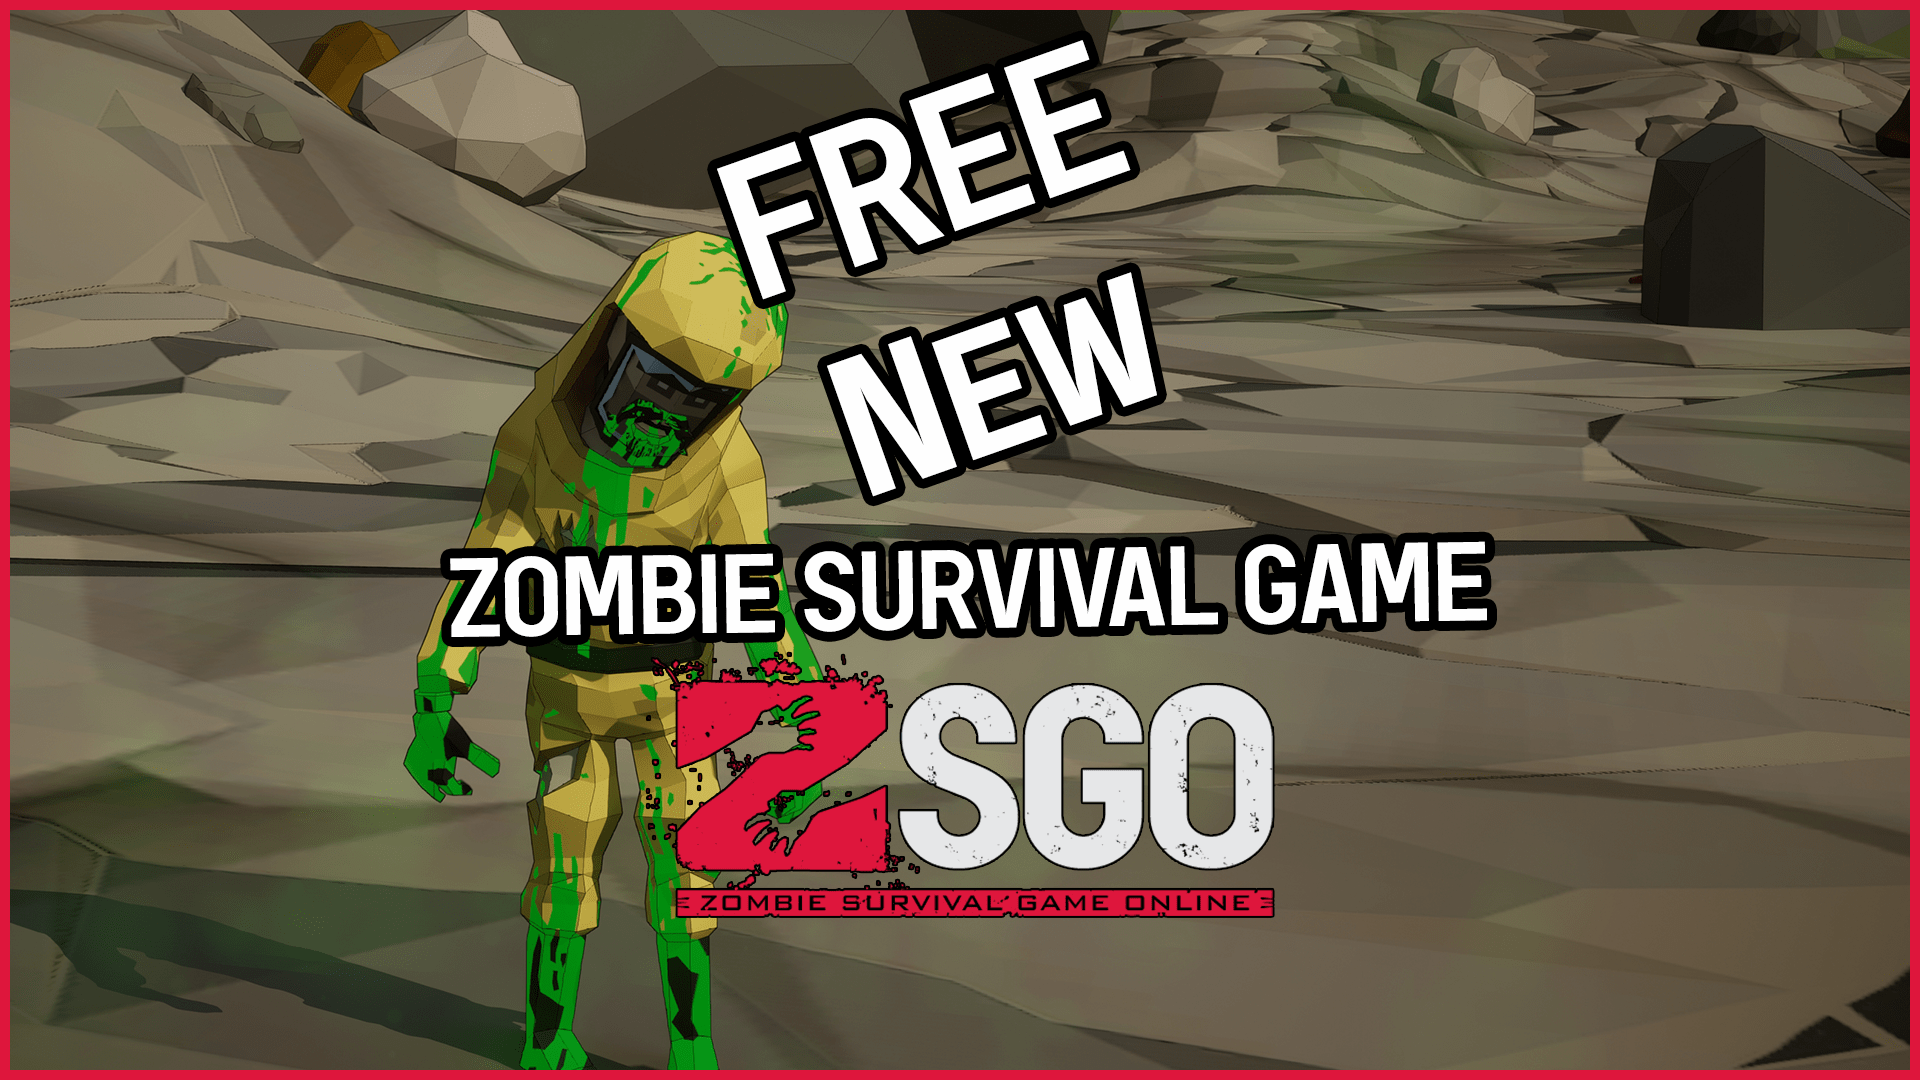 A thumbnail for the blog about a free zombie survival game.